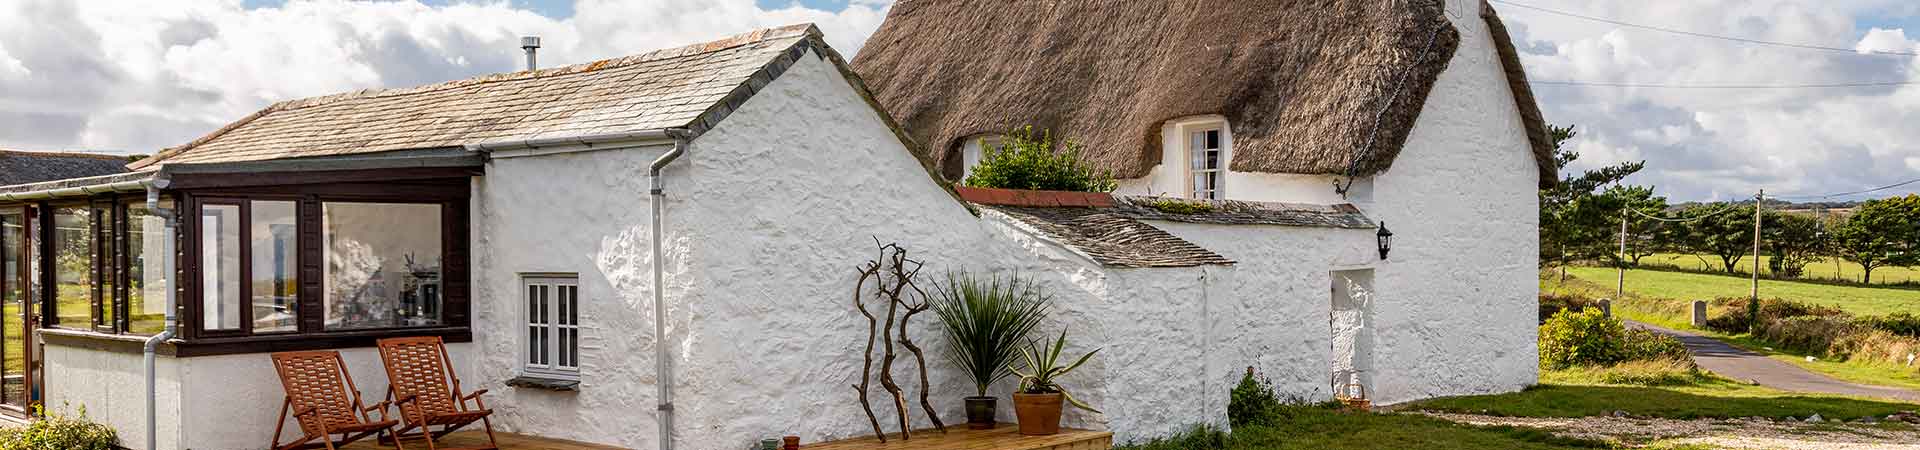 Thatched holiday cottages in Powys